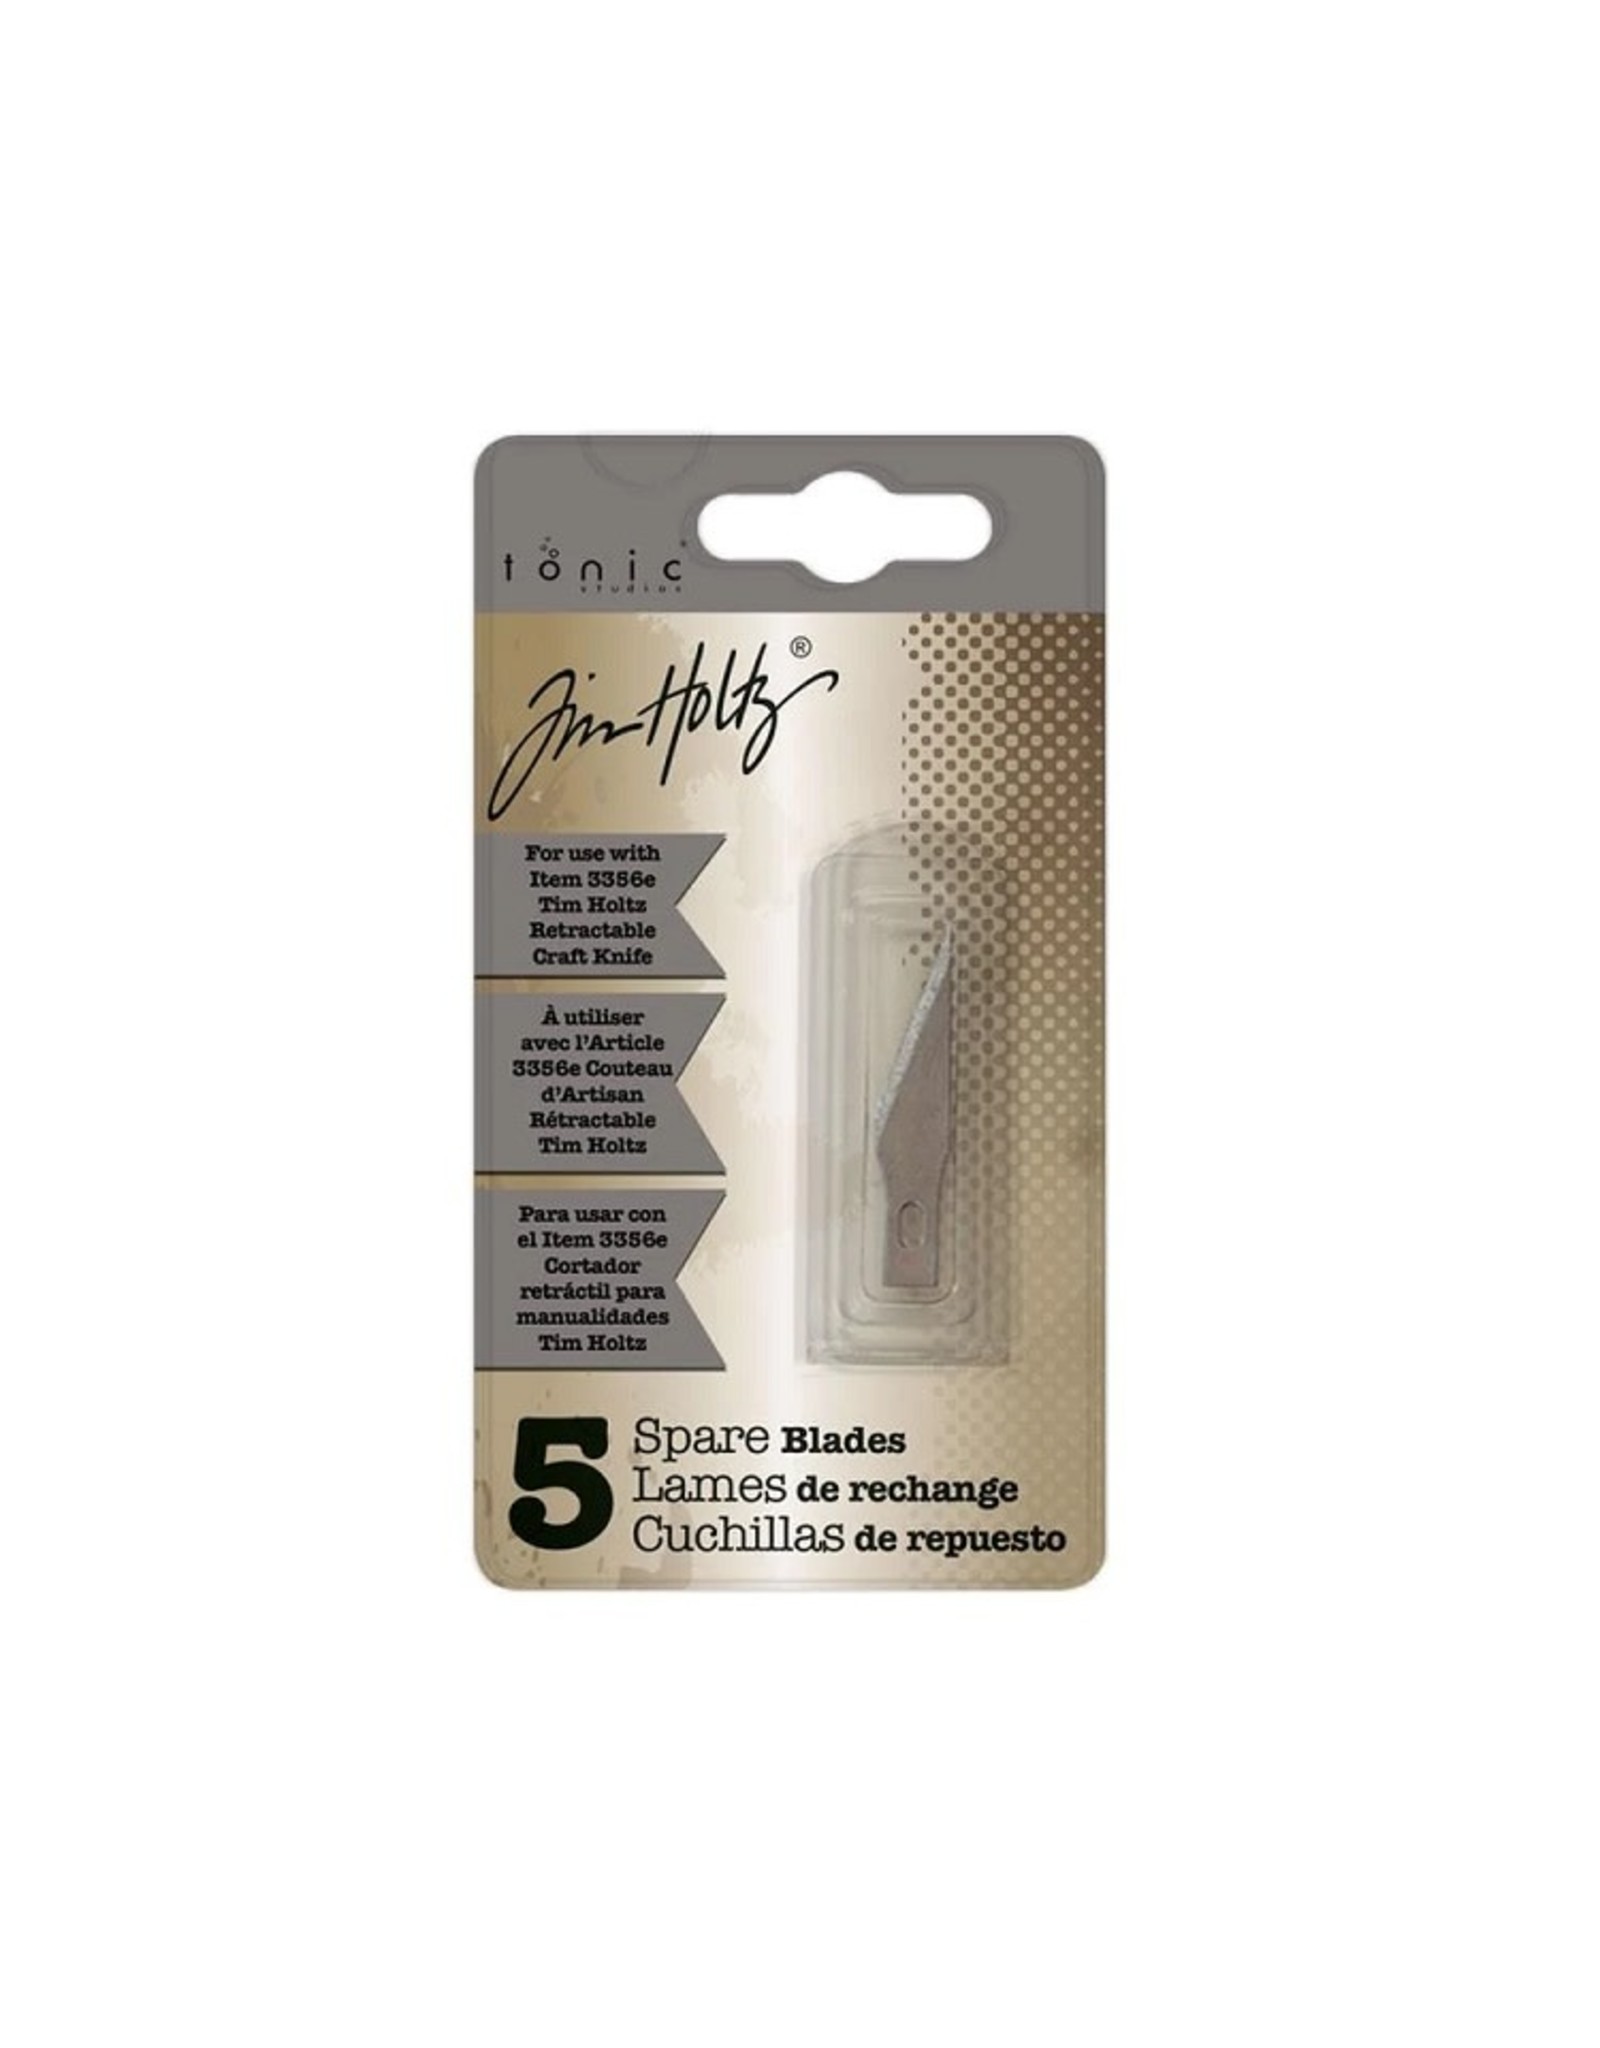 Tim Holtz - Tonic Retractable Craft Knife Spare Blades - Fine point #11 - 5 pk